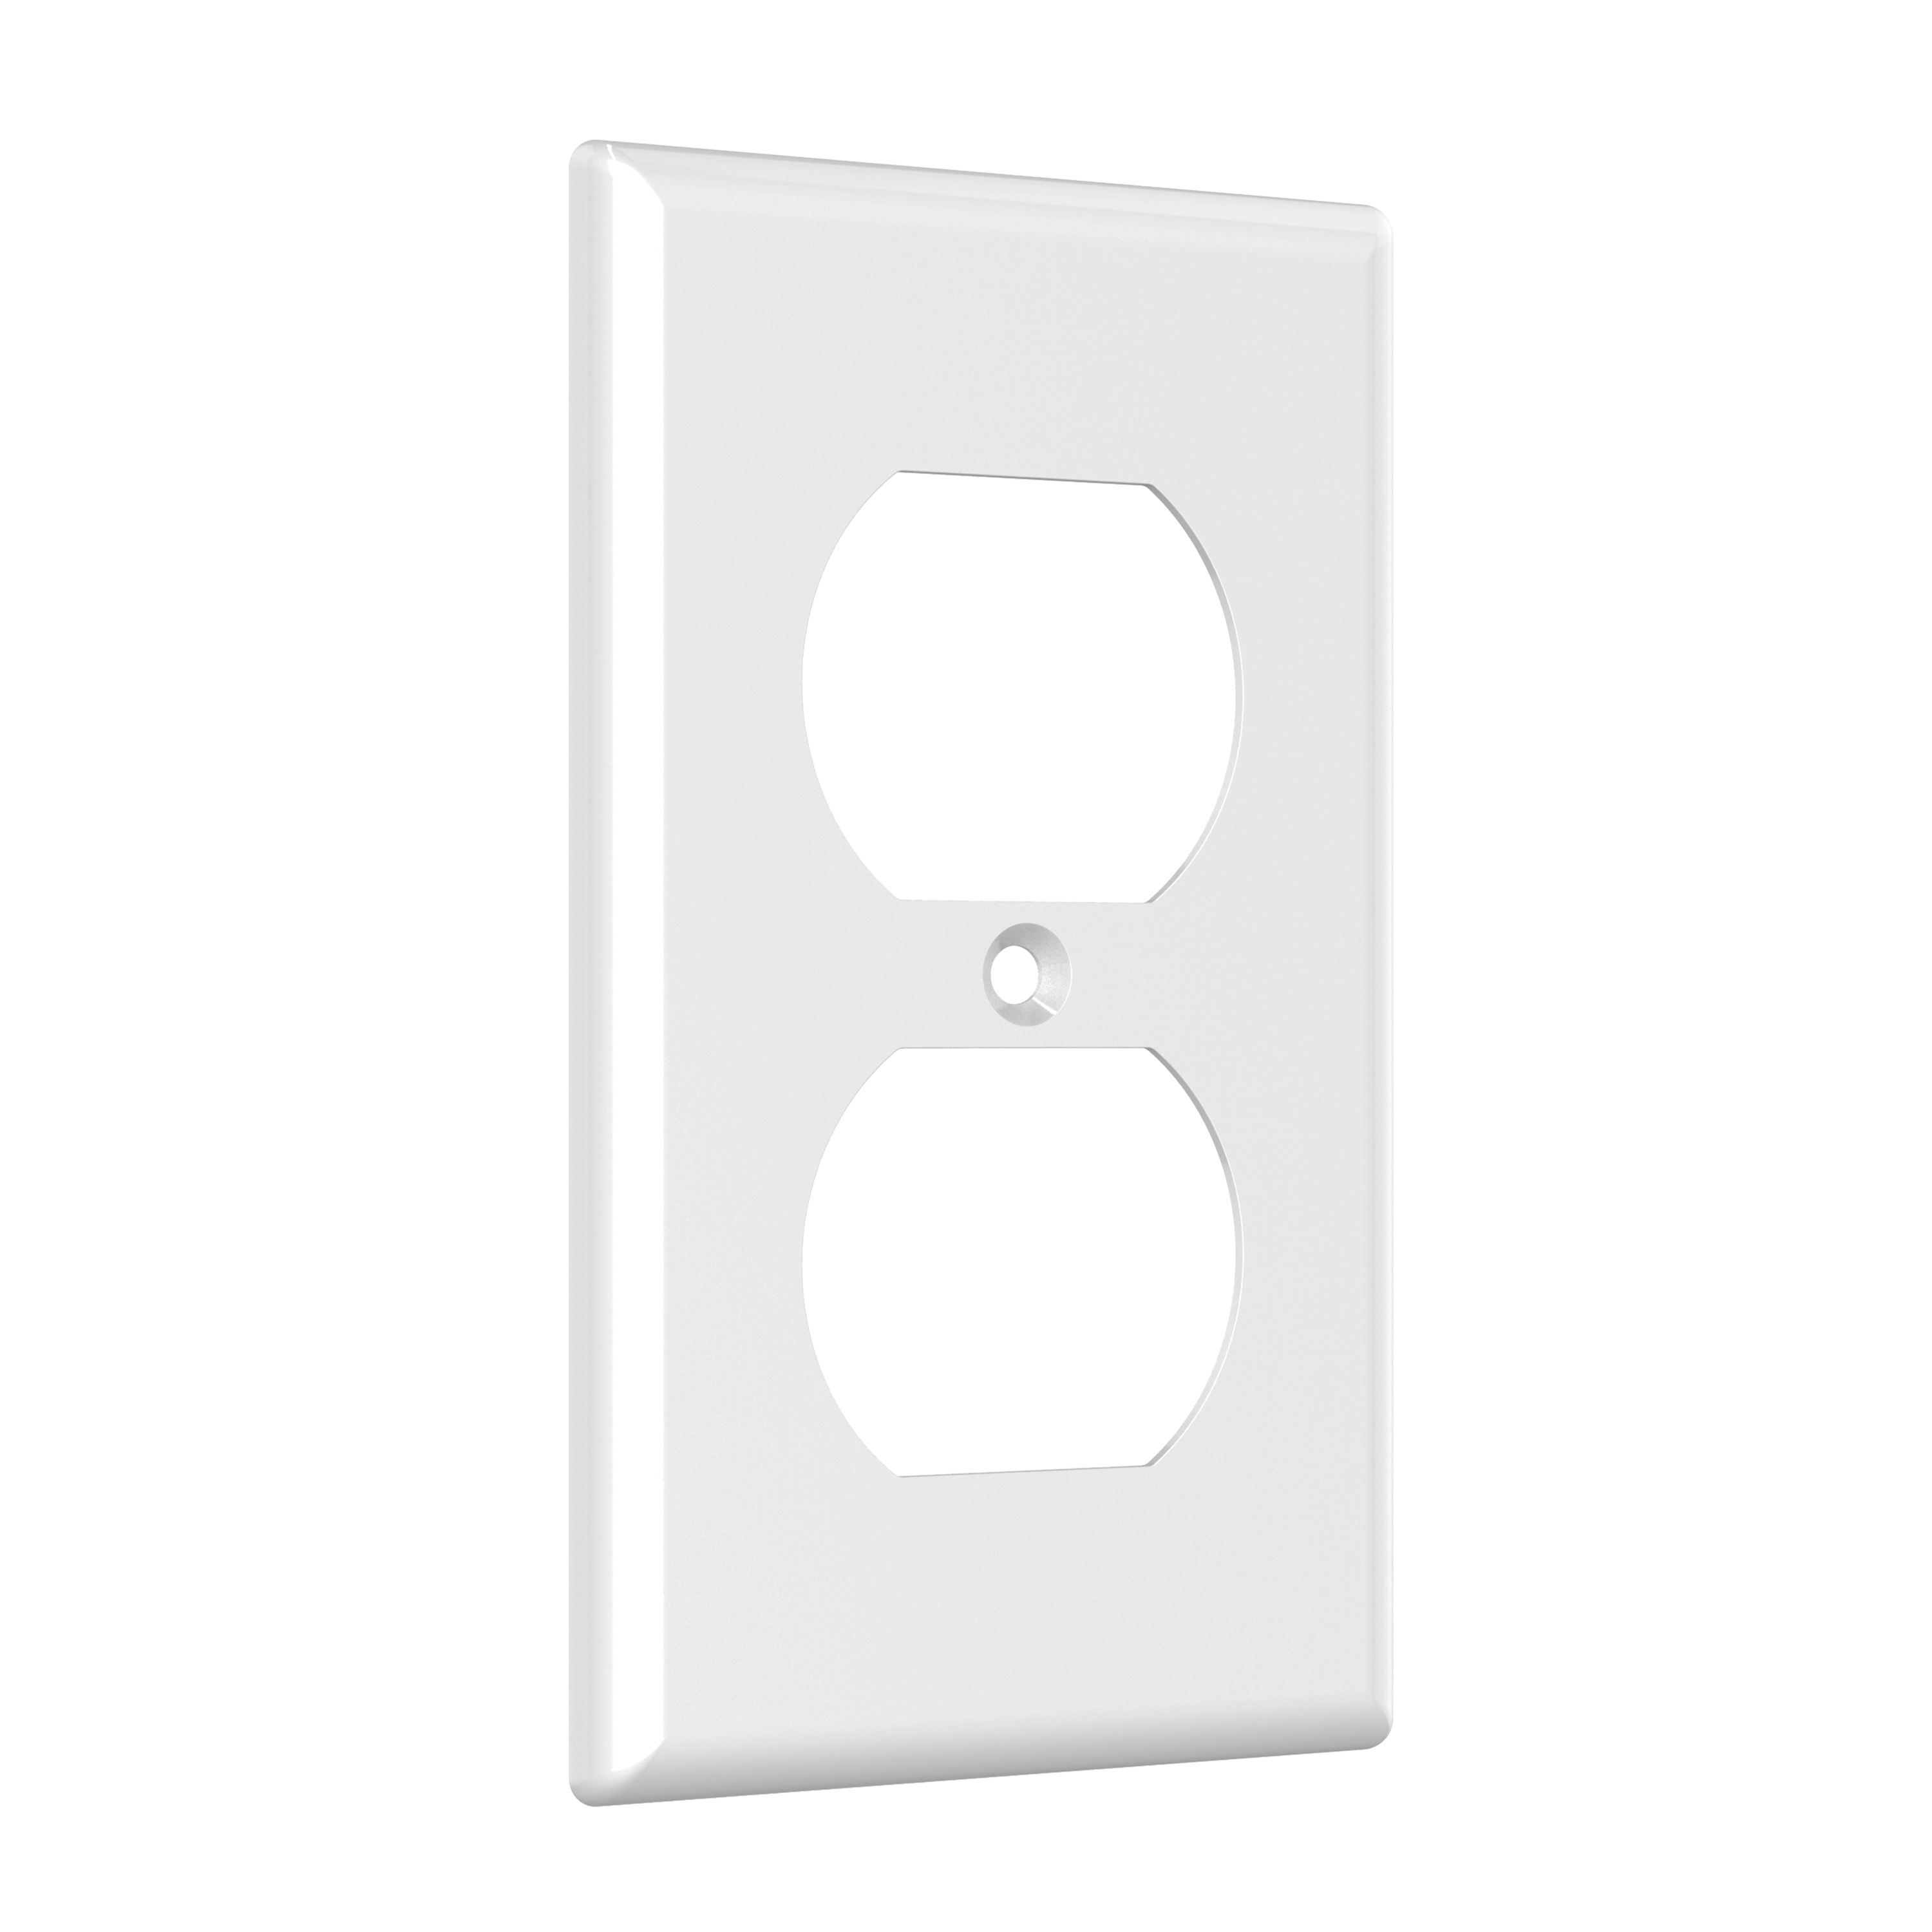 1-Gang Duplex Receptacle Wall Plate, Standard Size, Polycarbonate Thermoplastic.